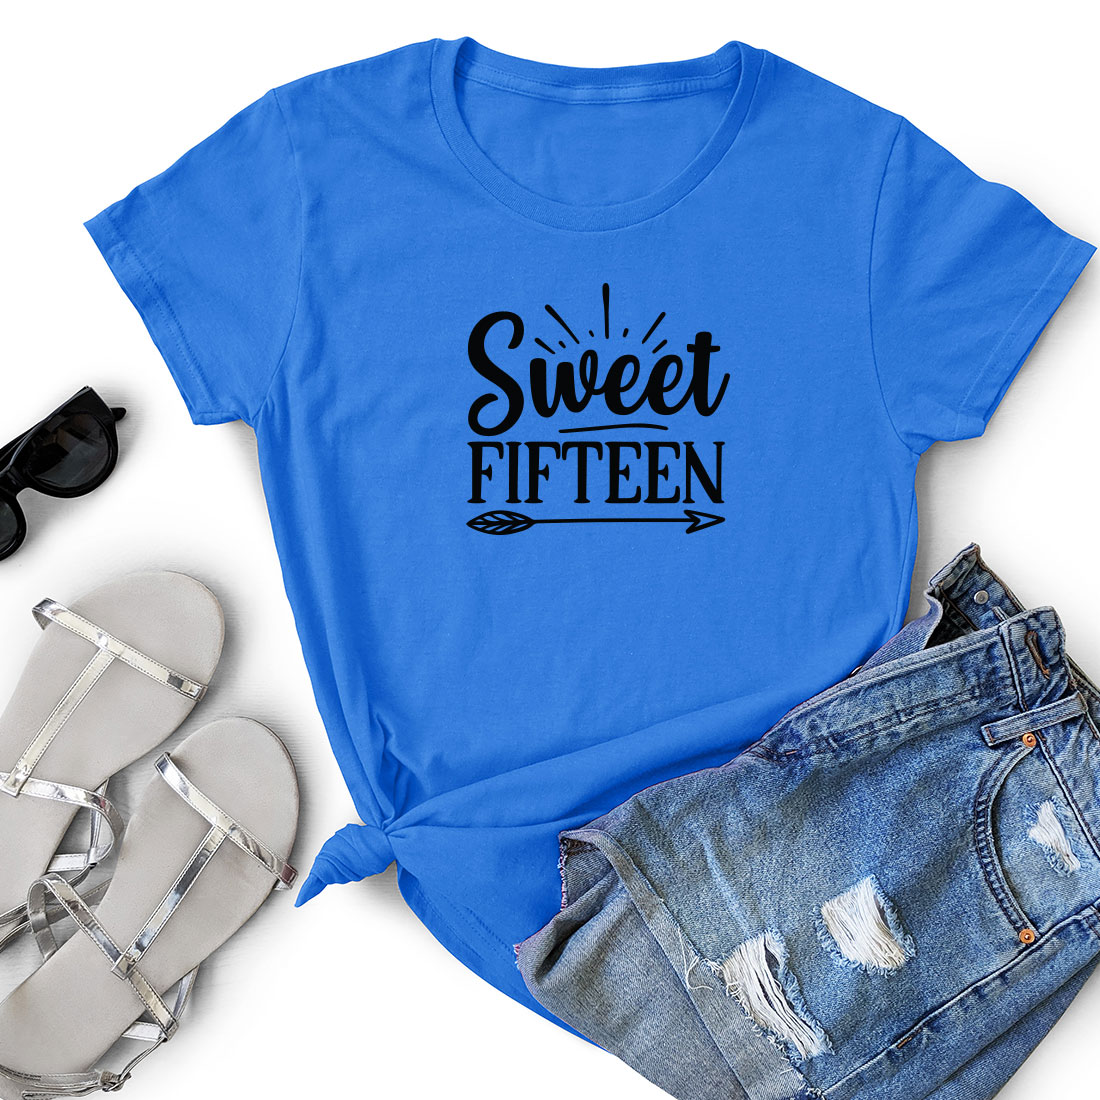 T - shirt that says sweet fifteen next to a pair of shorts.